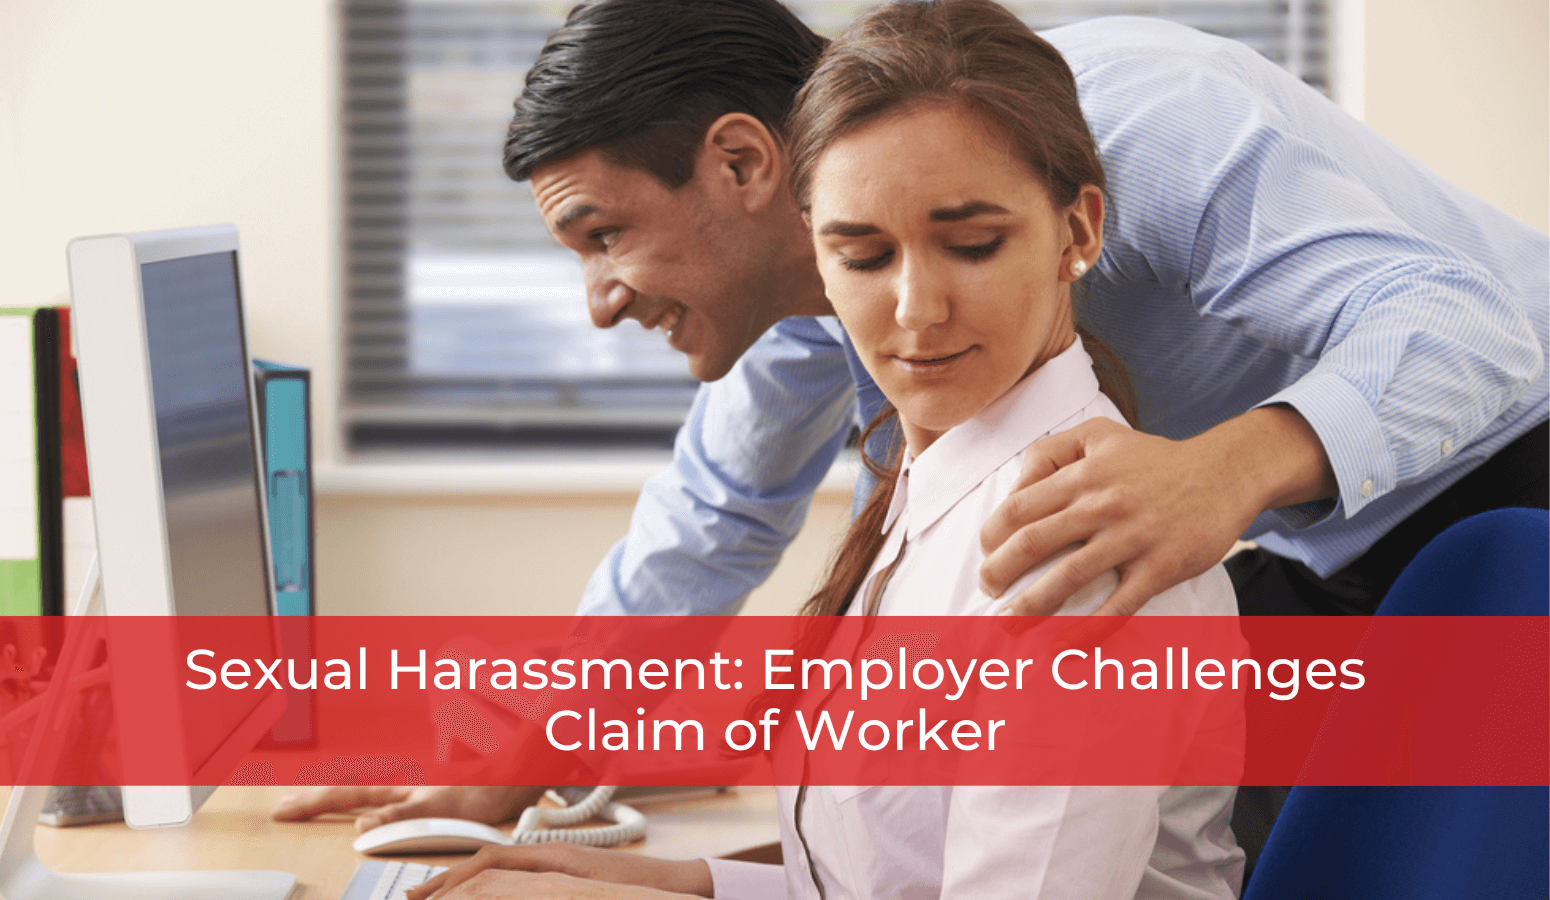 Featured image for “Sexual Harassment: Employer Challenges Claim of Worker”